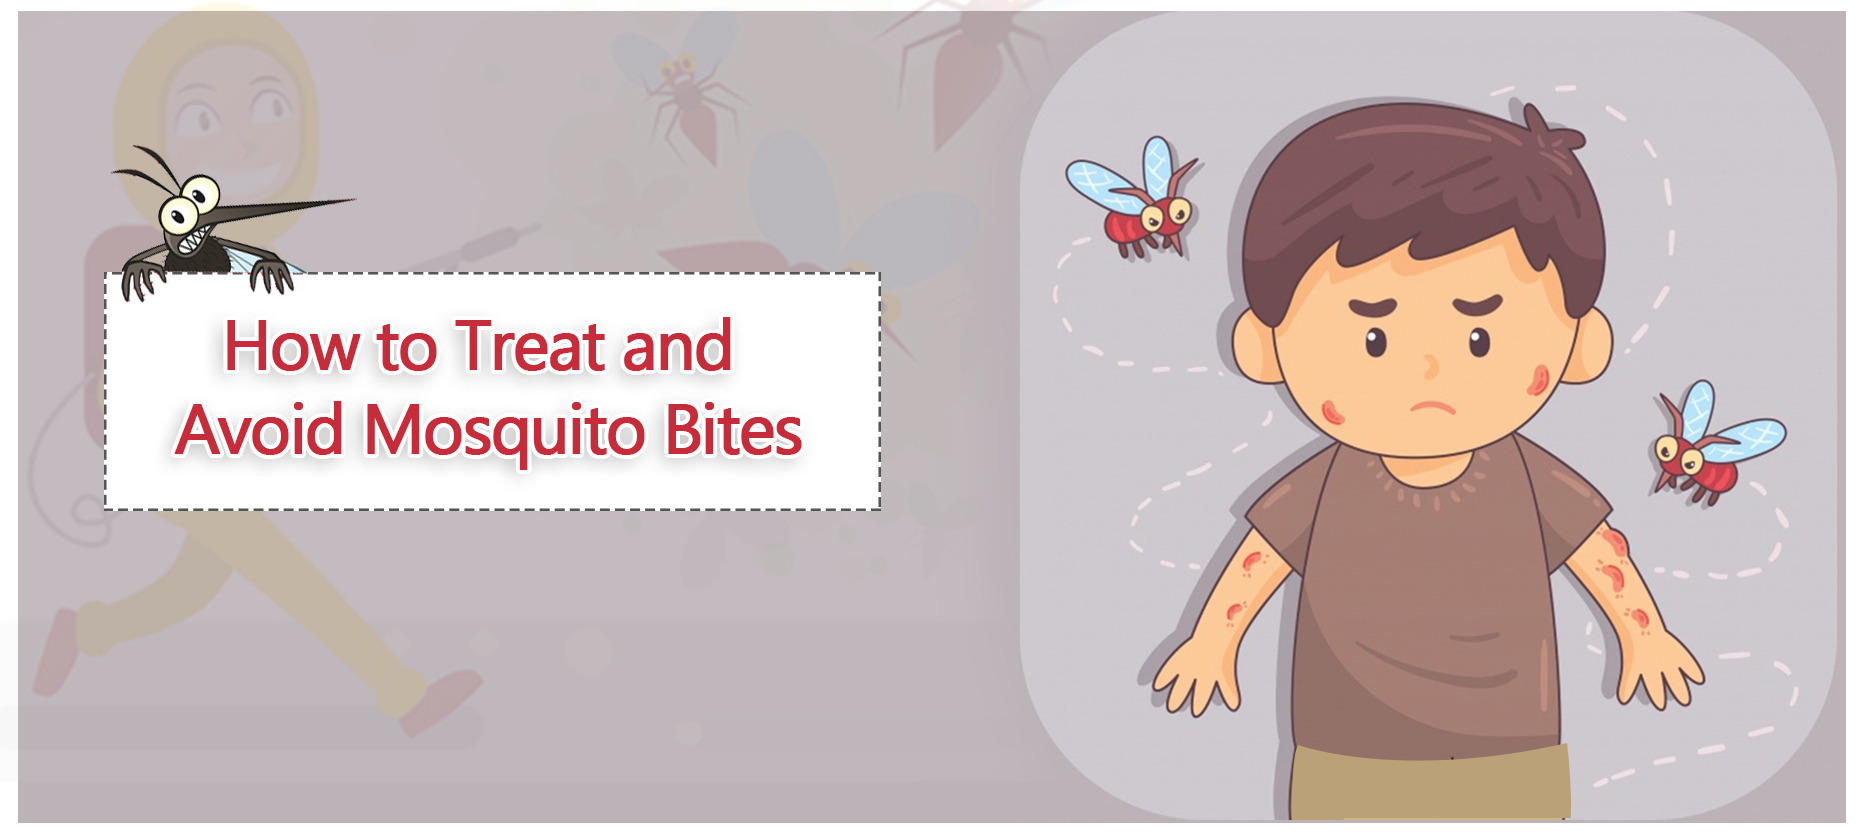 Best Ways to Avoid and Prevent Mosquito Bites